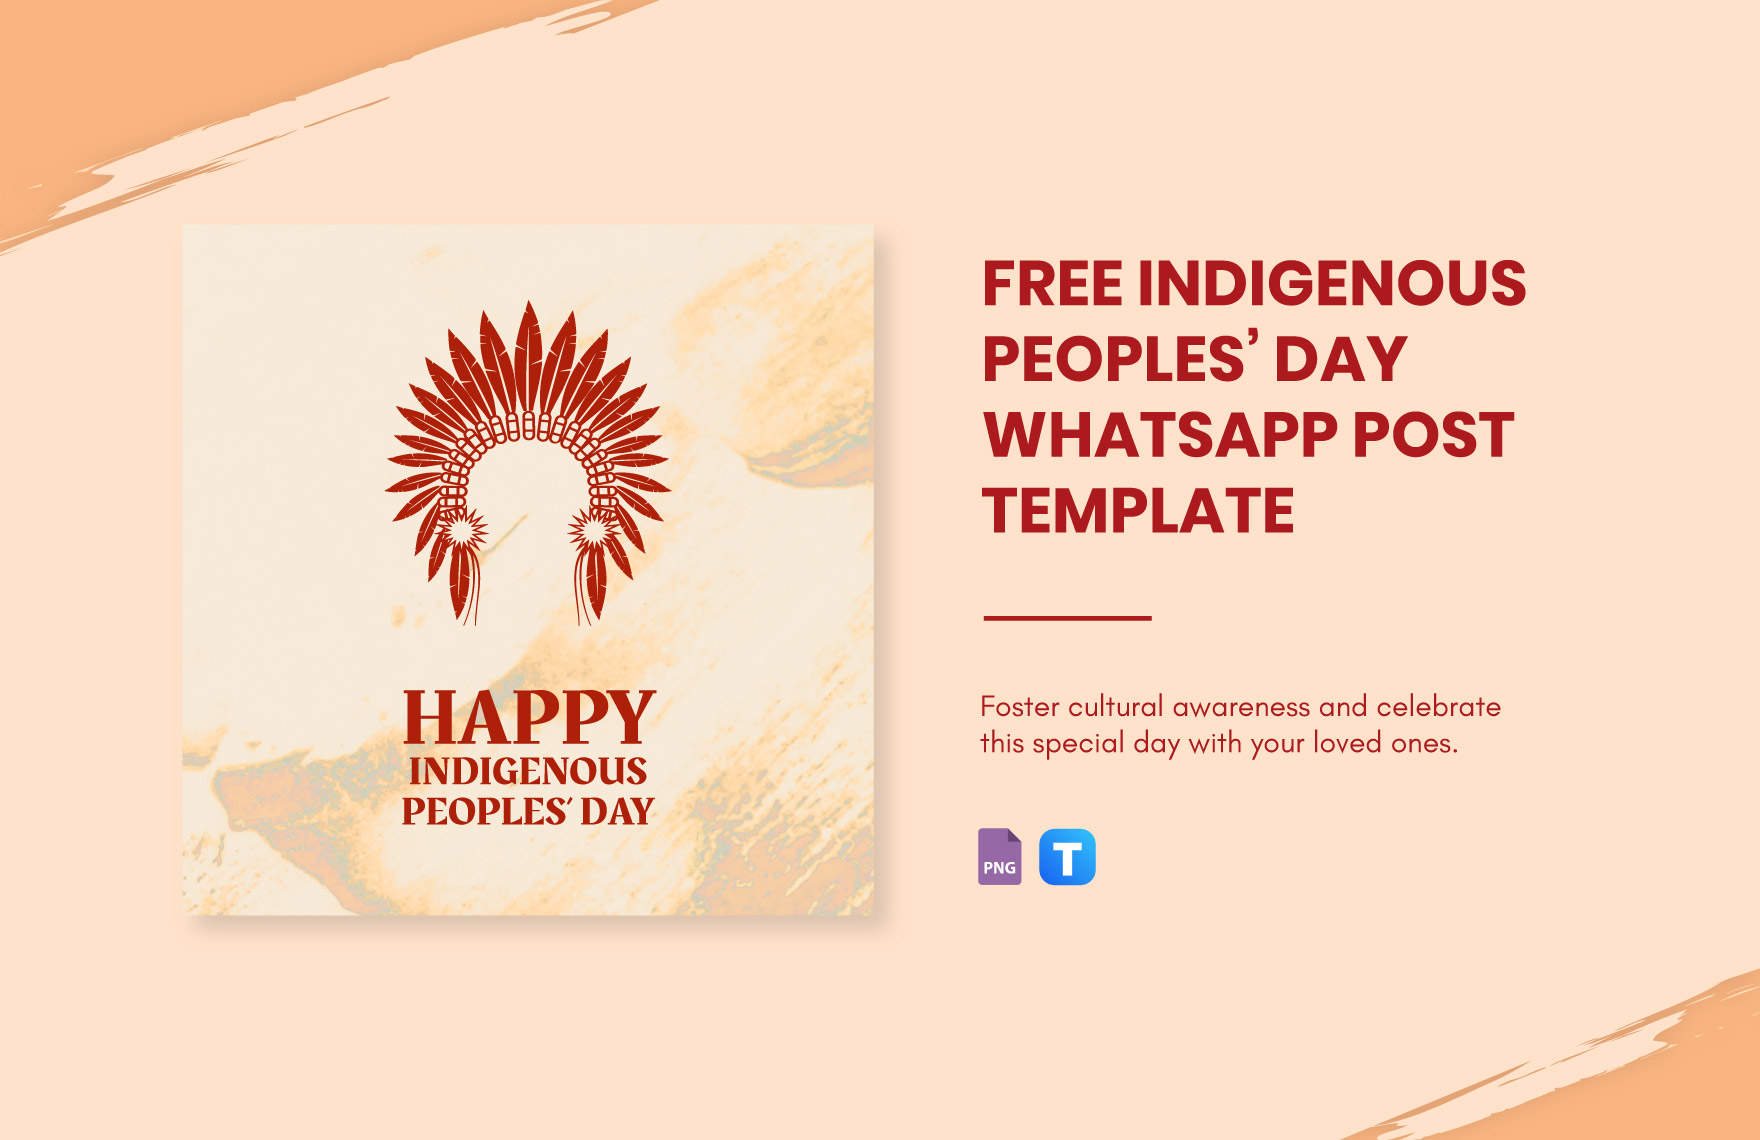 Free Indigenous Peoples' Day WhatsApp Post Template in PNG